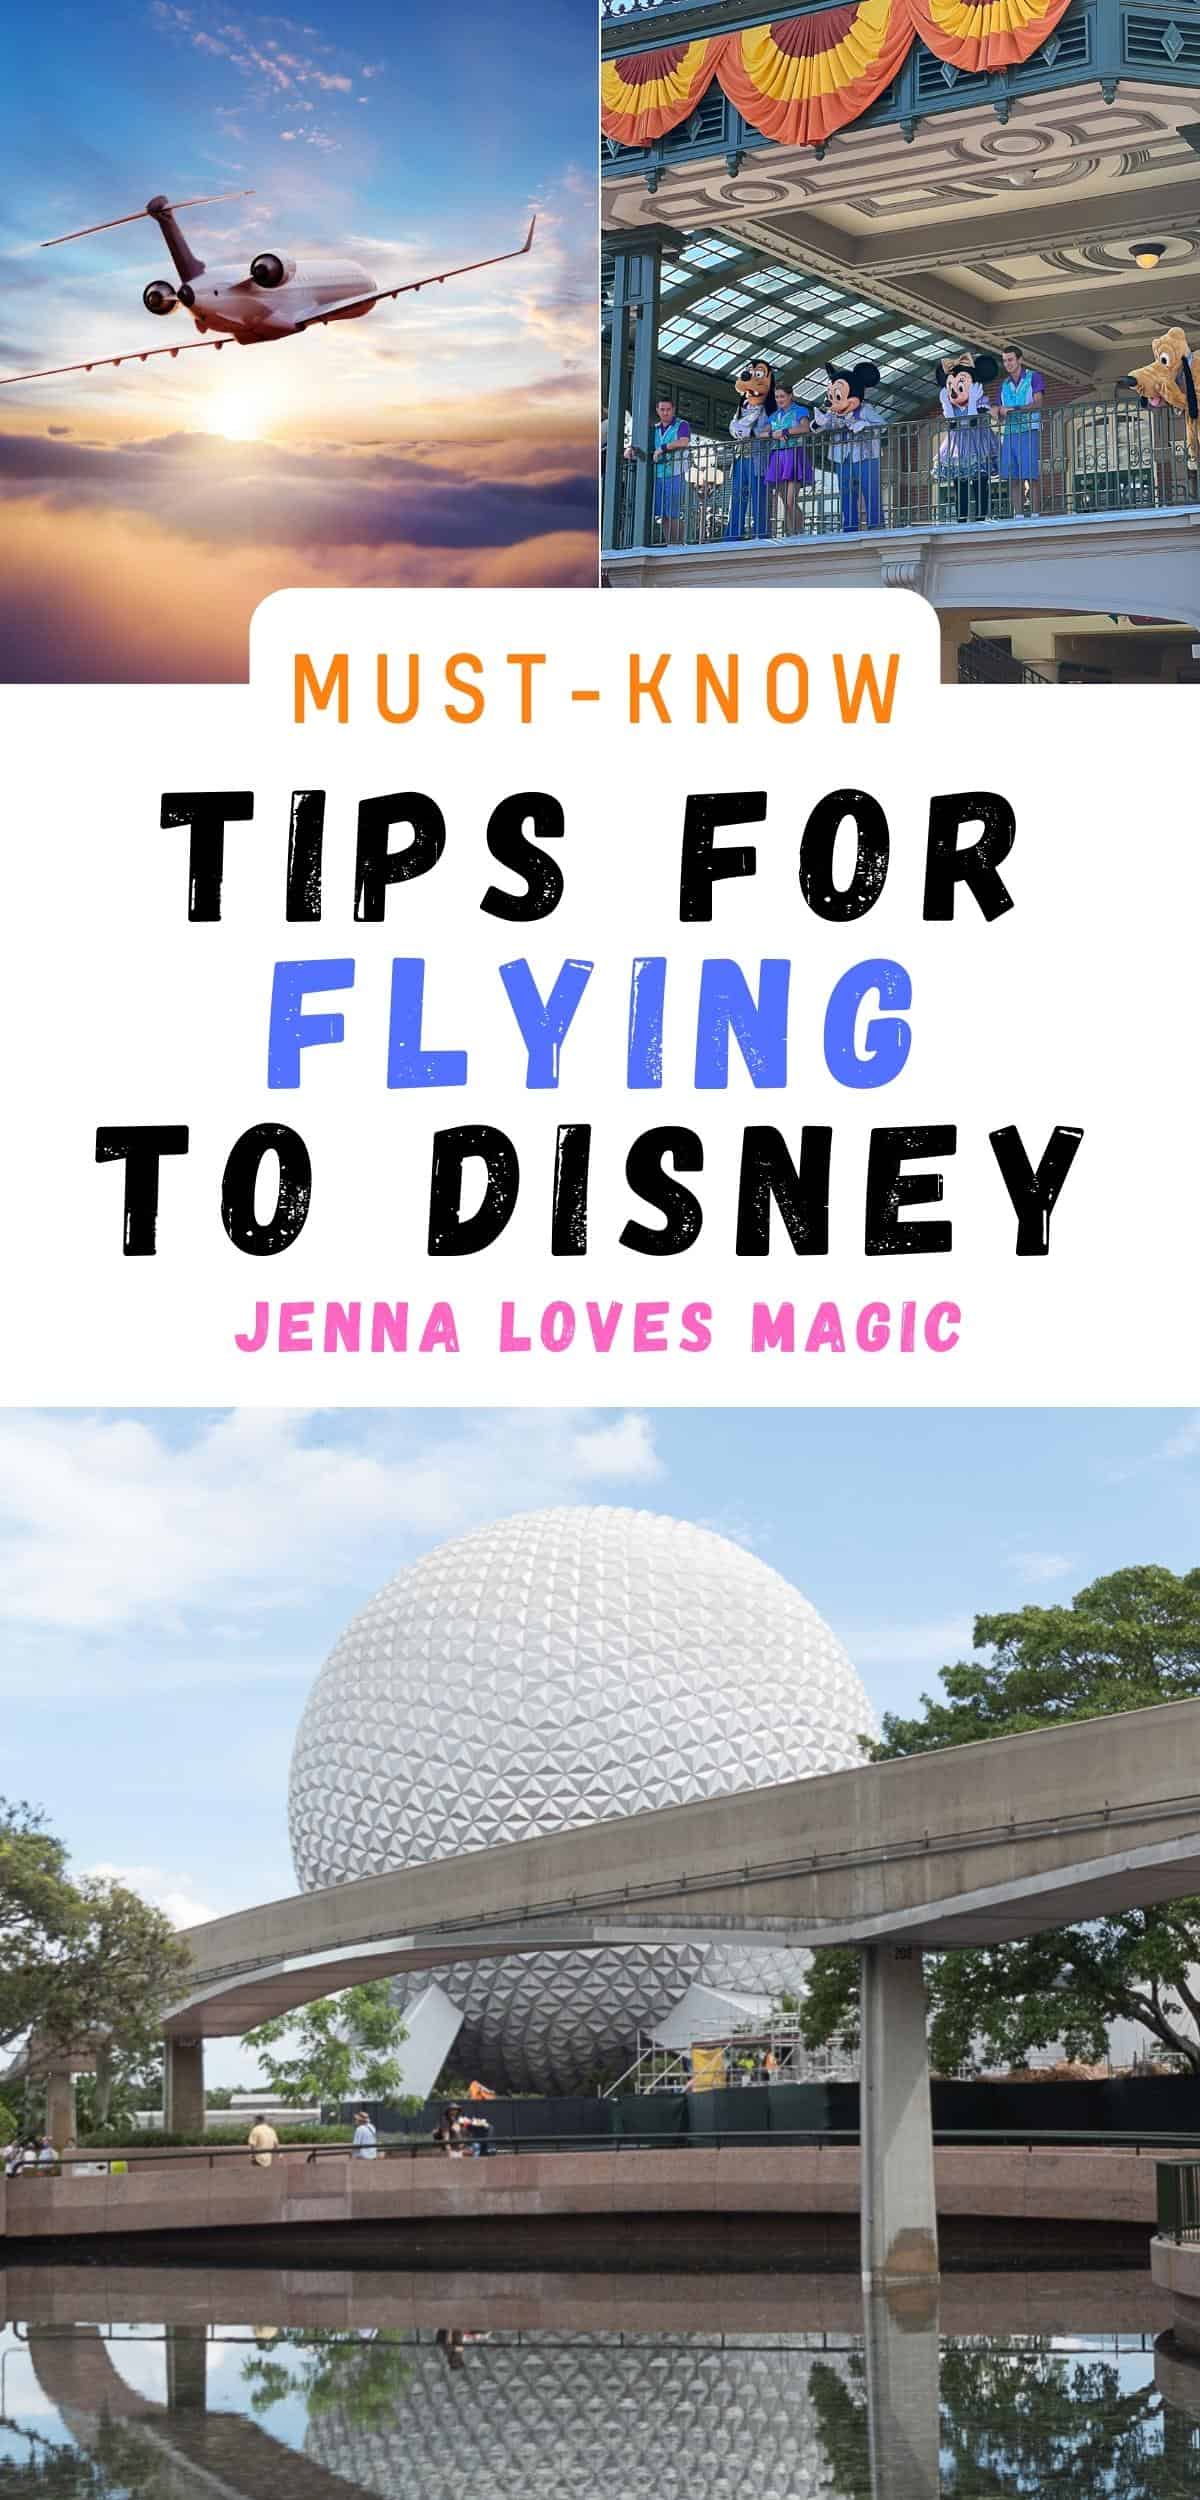 Tips for flying to disney world with text overlay and plane and theme park photos with Jenna Loves Magic logo